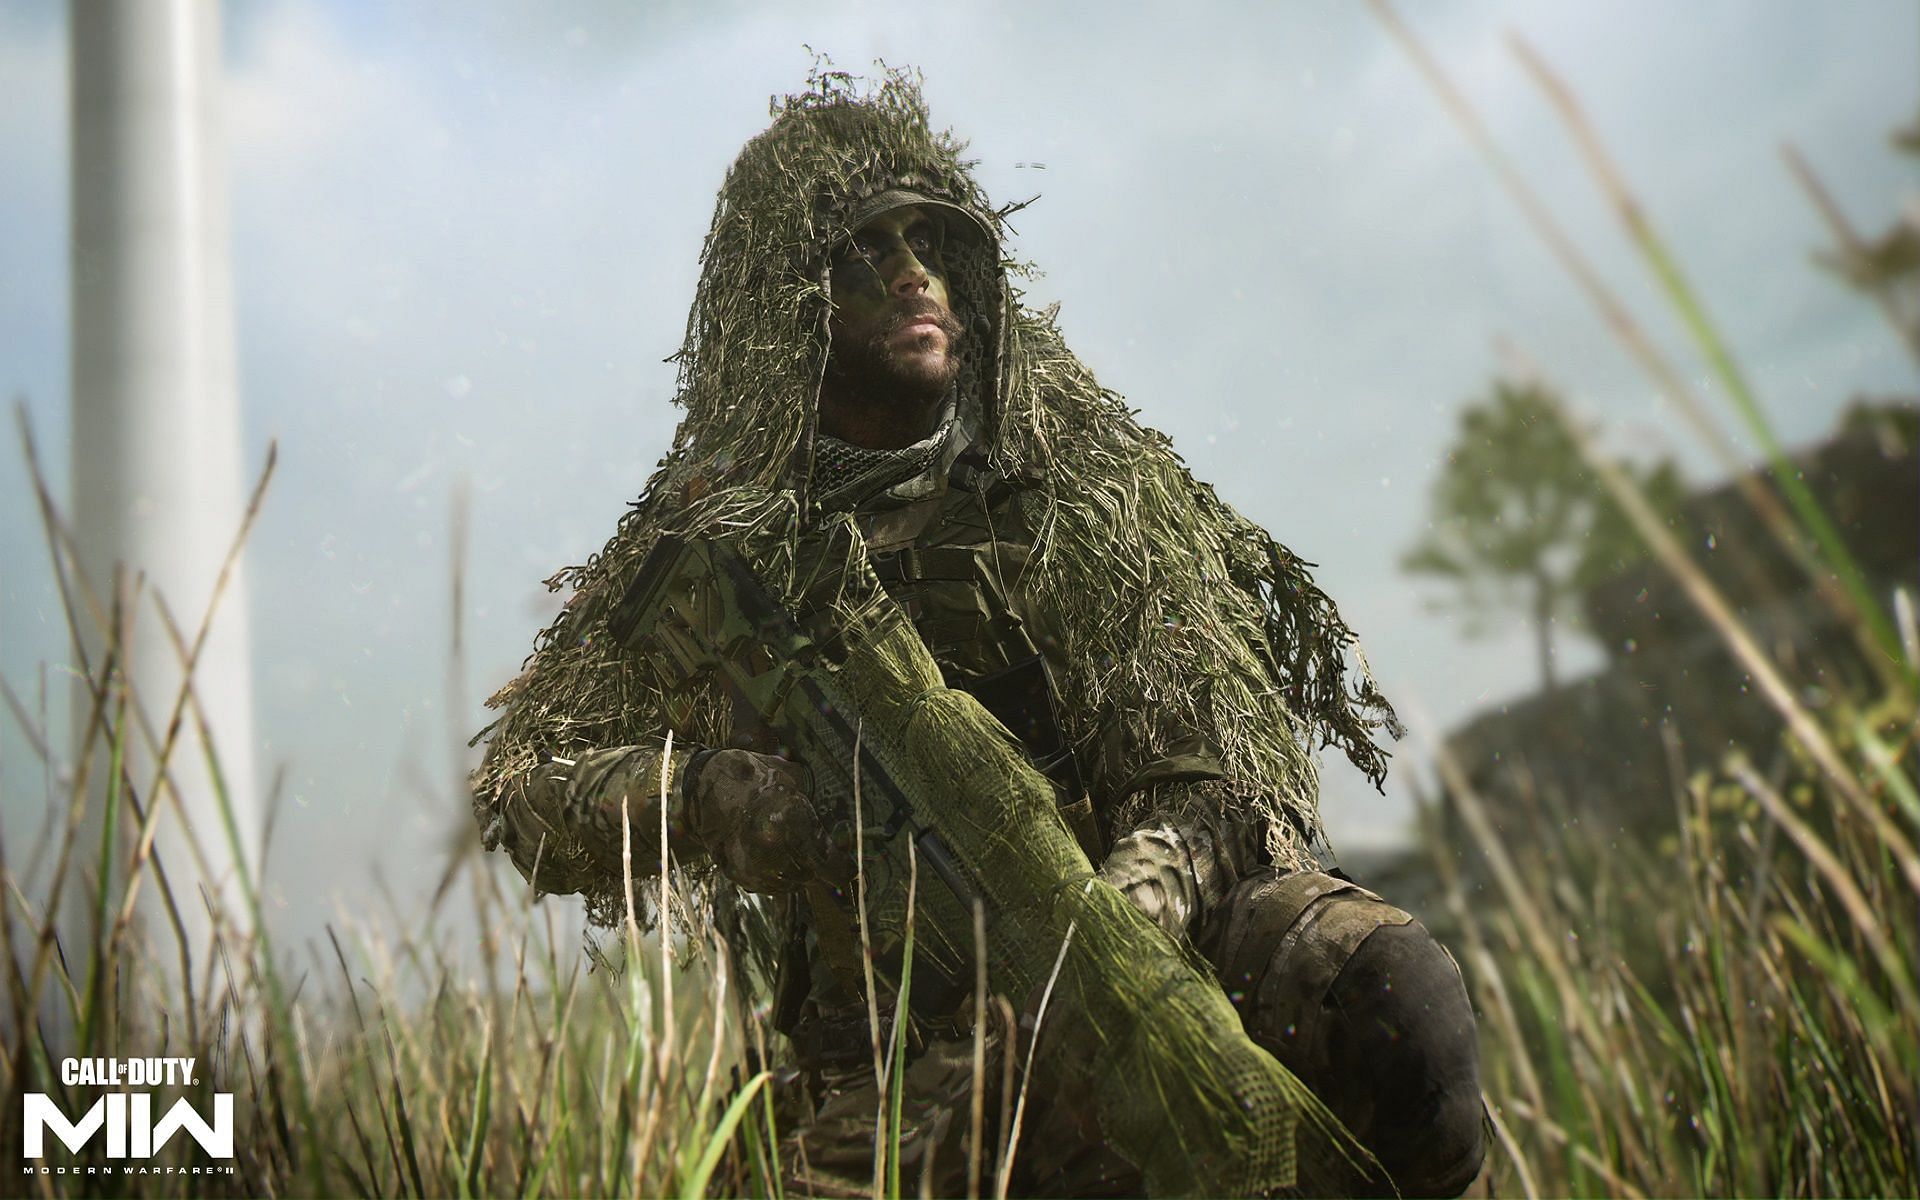 Modern Warfare 2 is bringing back the best Call of Duty mission ever